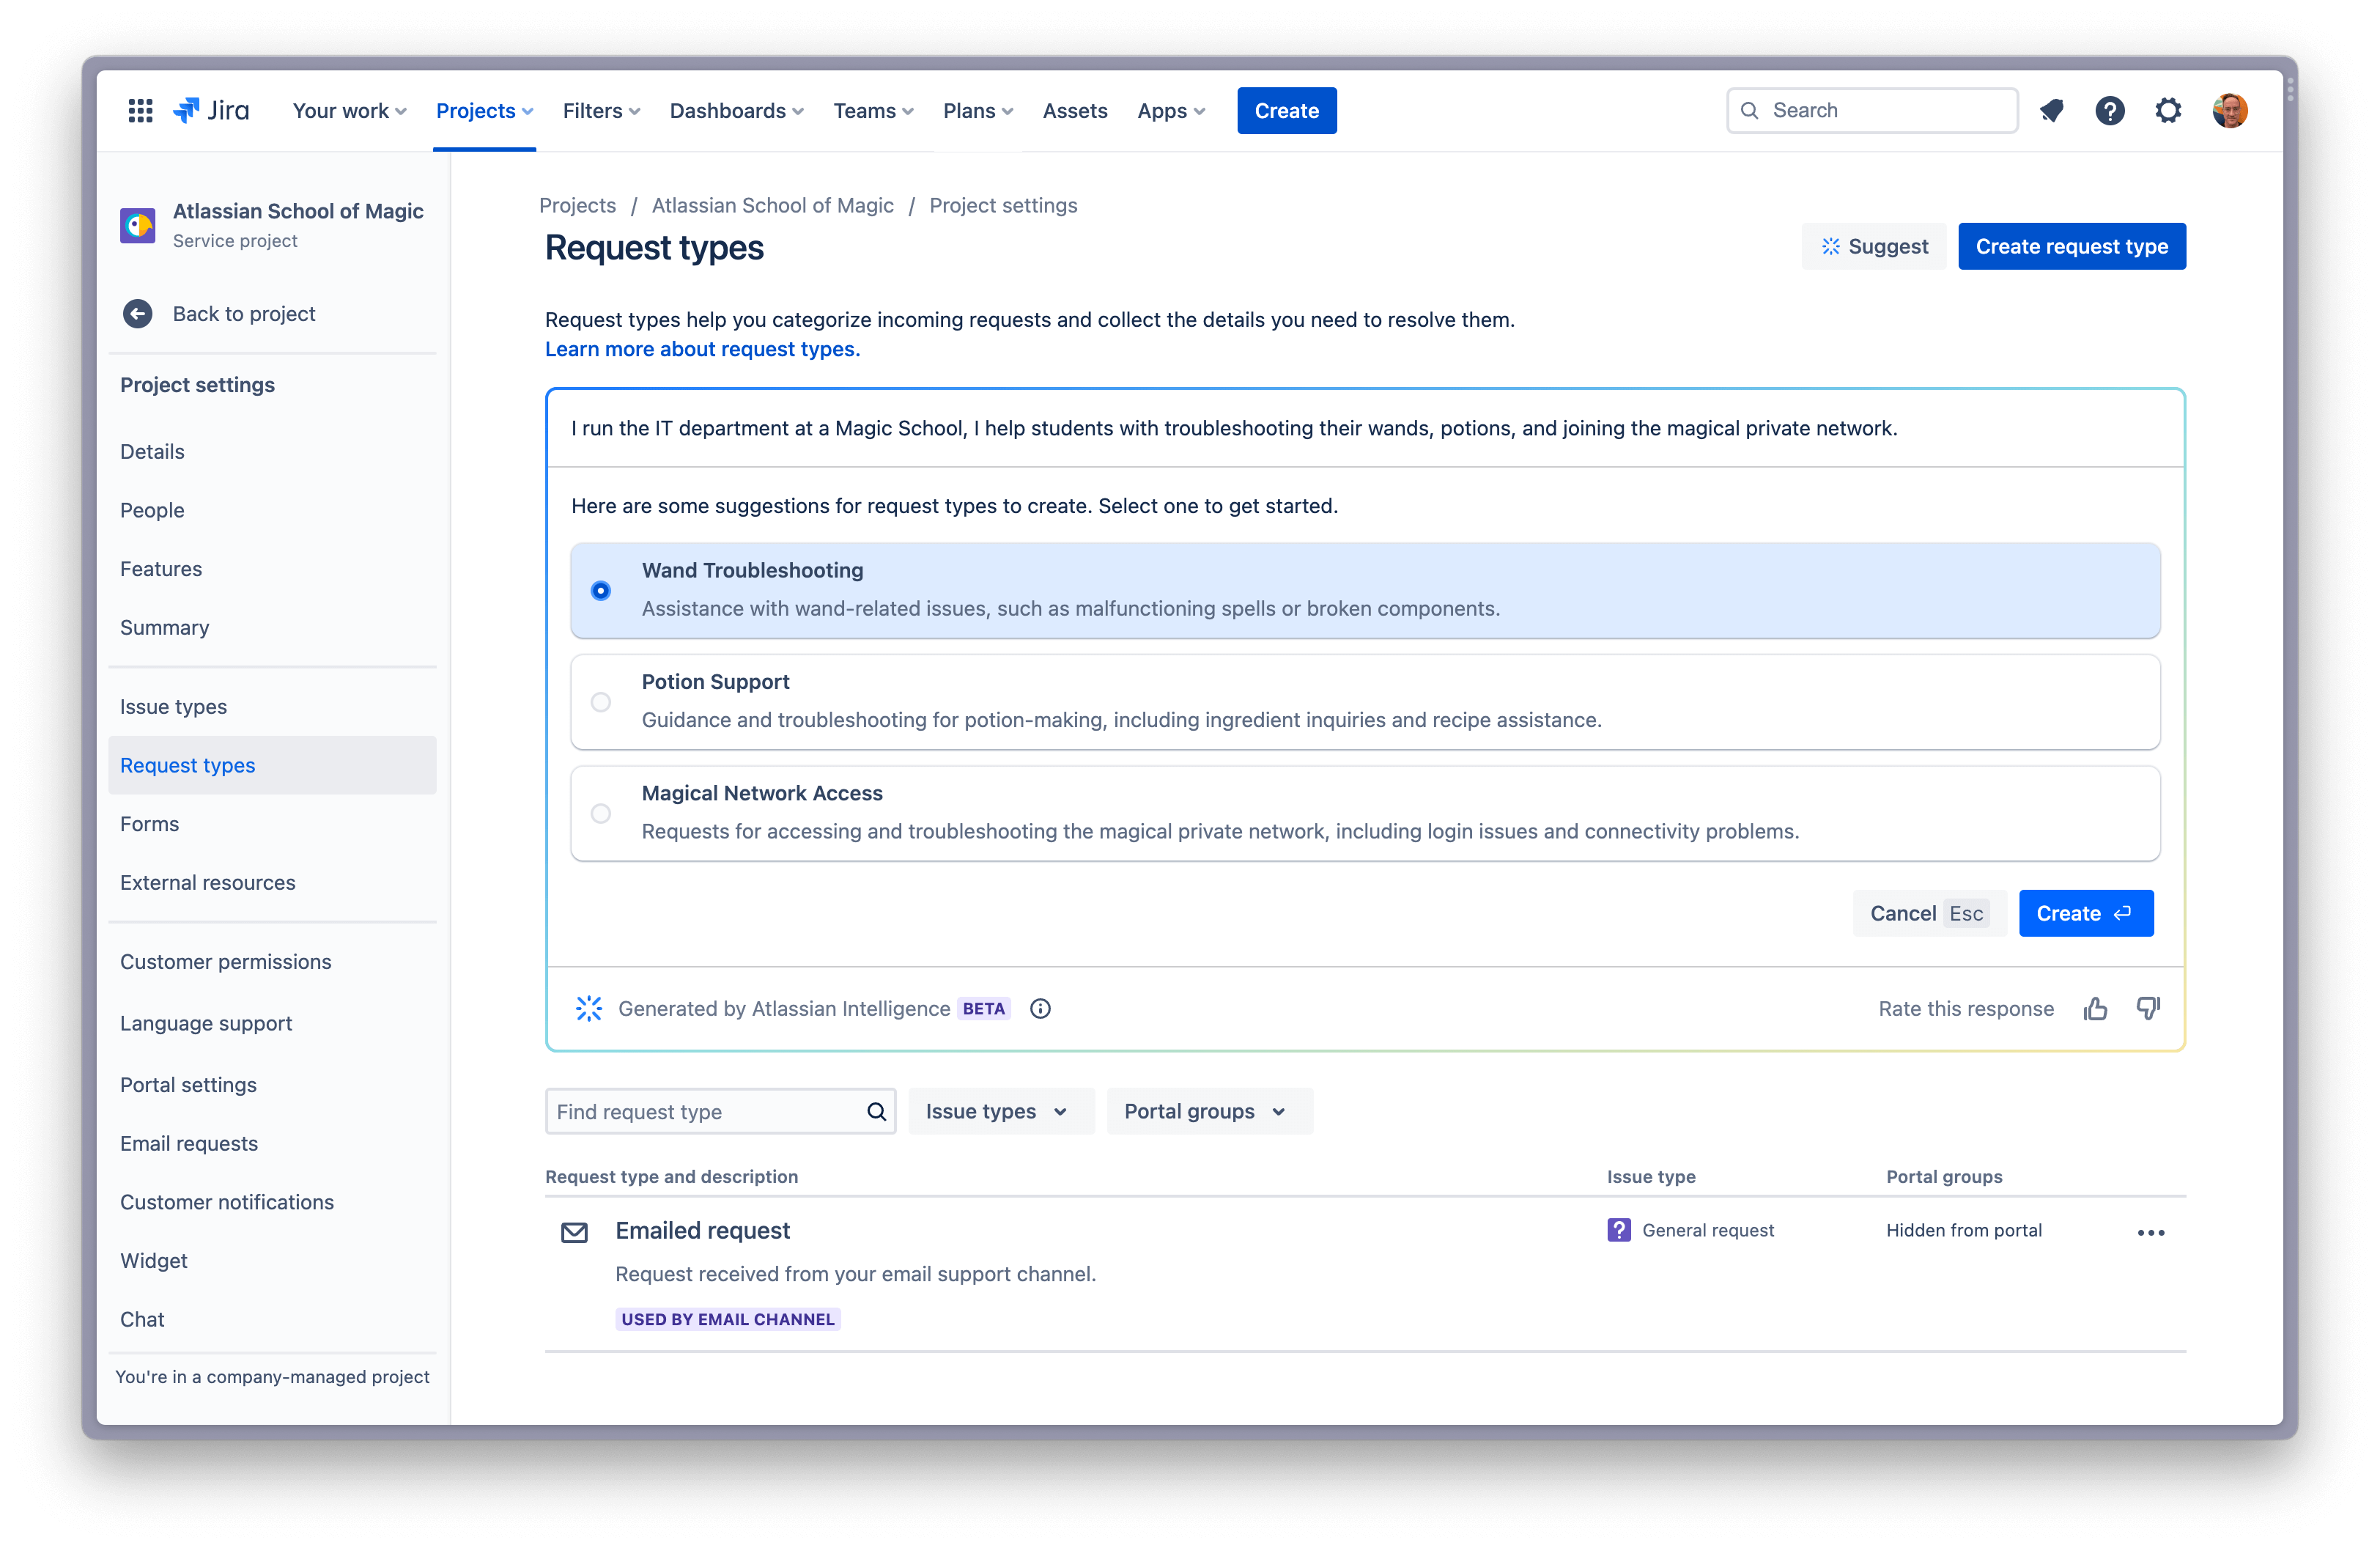 Selecting from a list of three request types to create, generated by Atlassian Intelligence